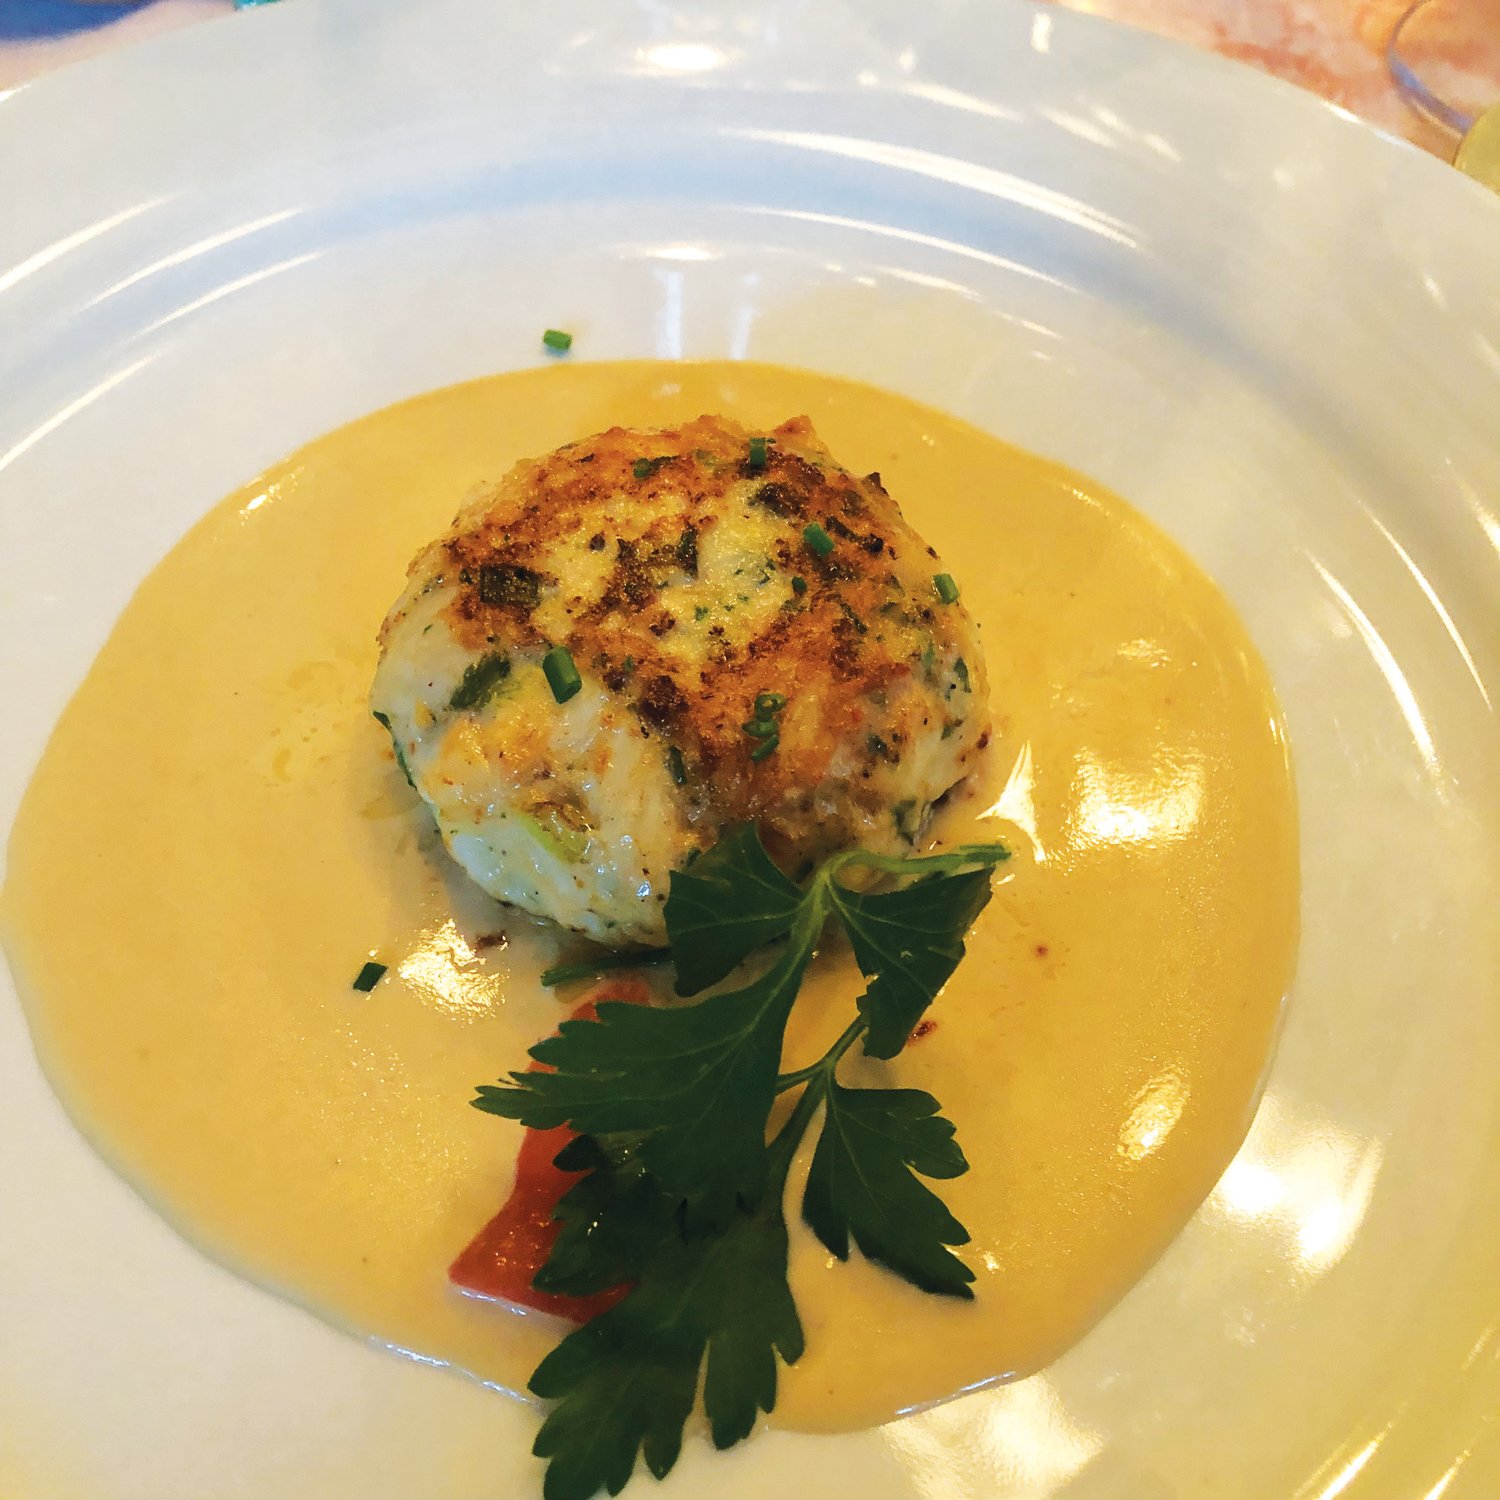 Crab cakes bound with a shrimp mousse and served with a mustard sauce were Club Car favorites.